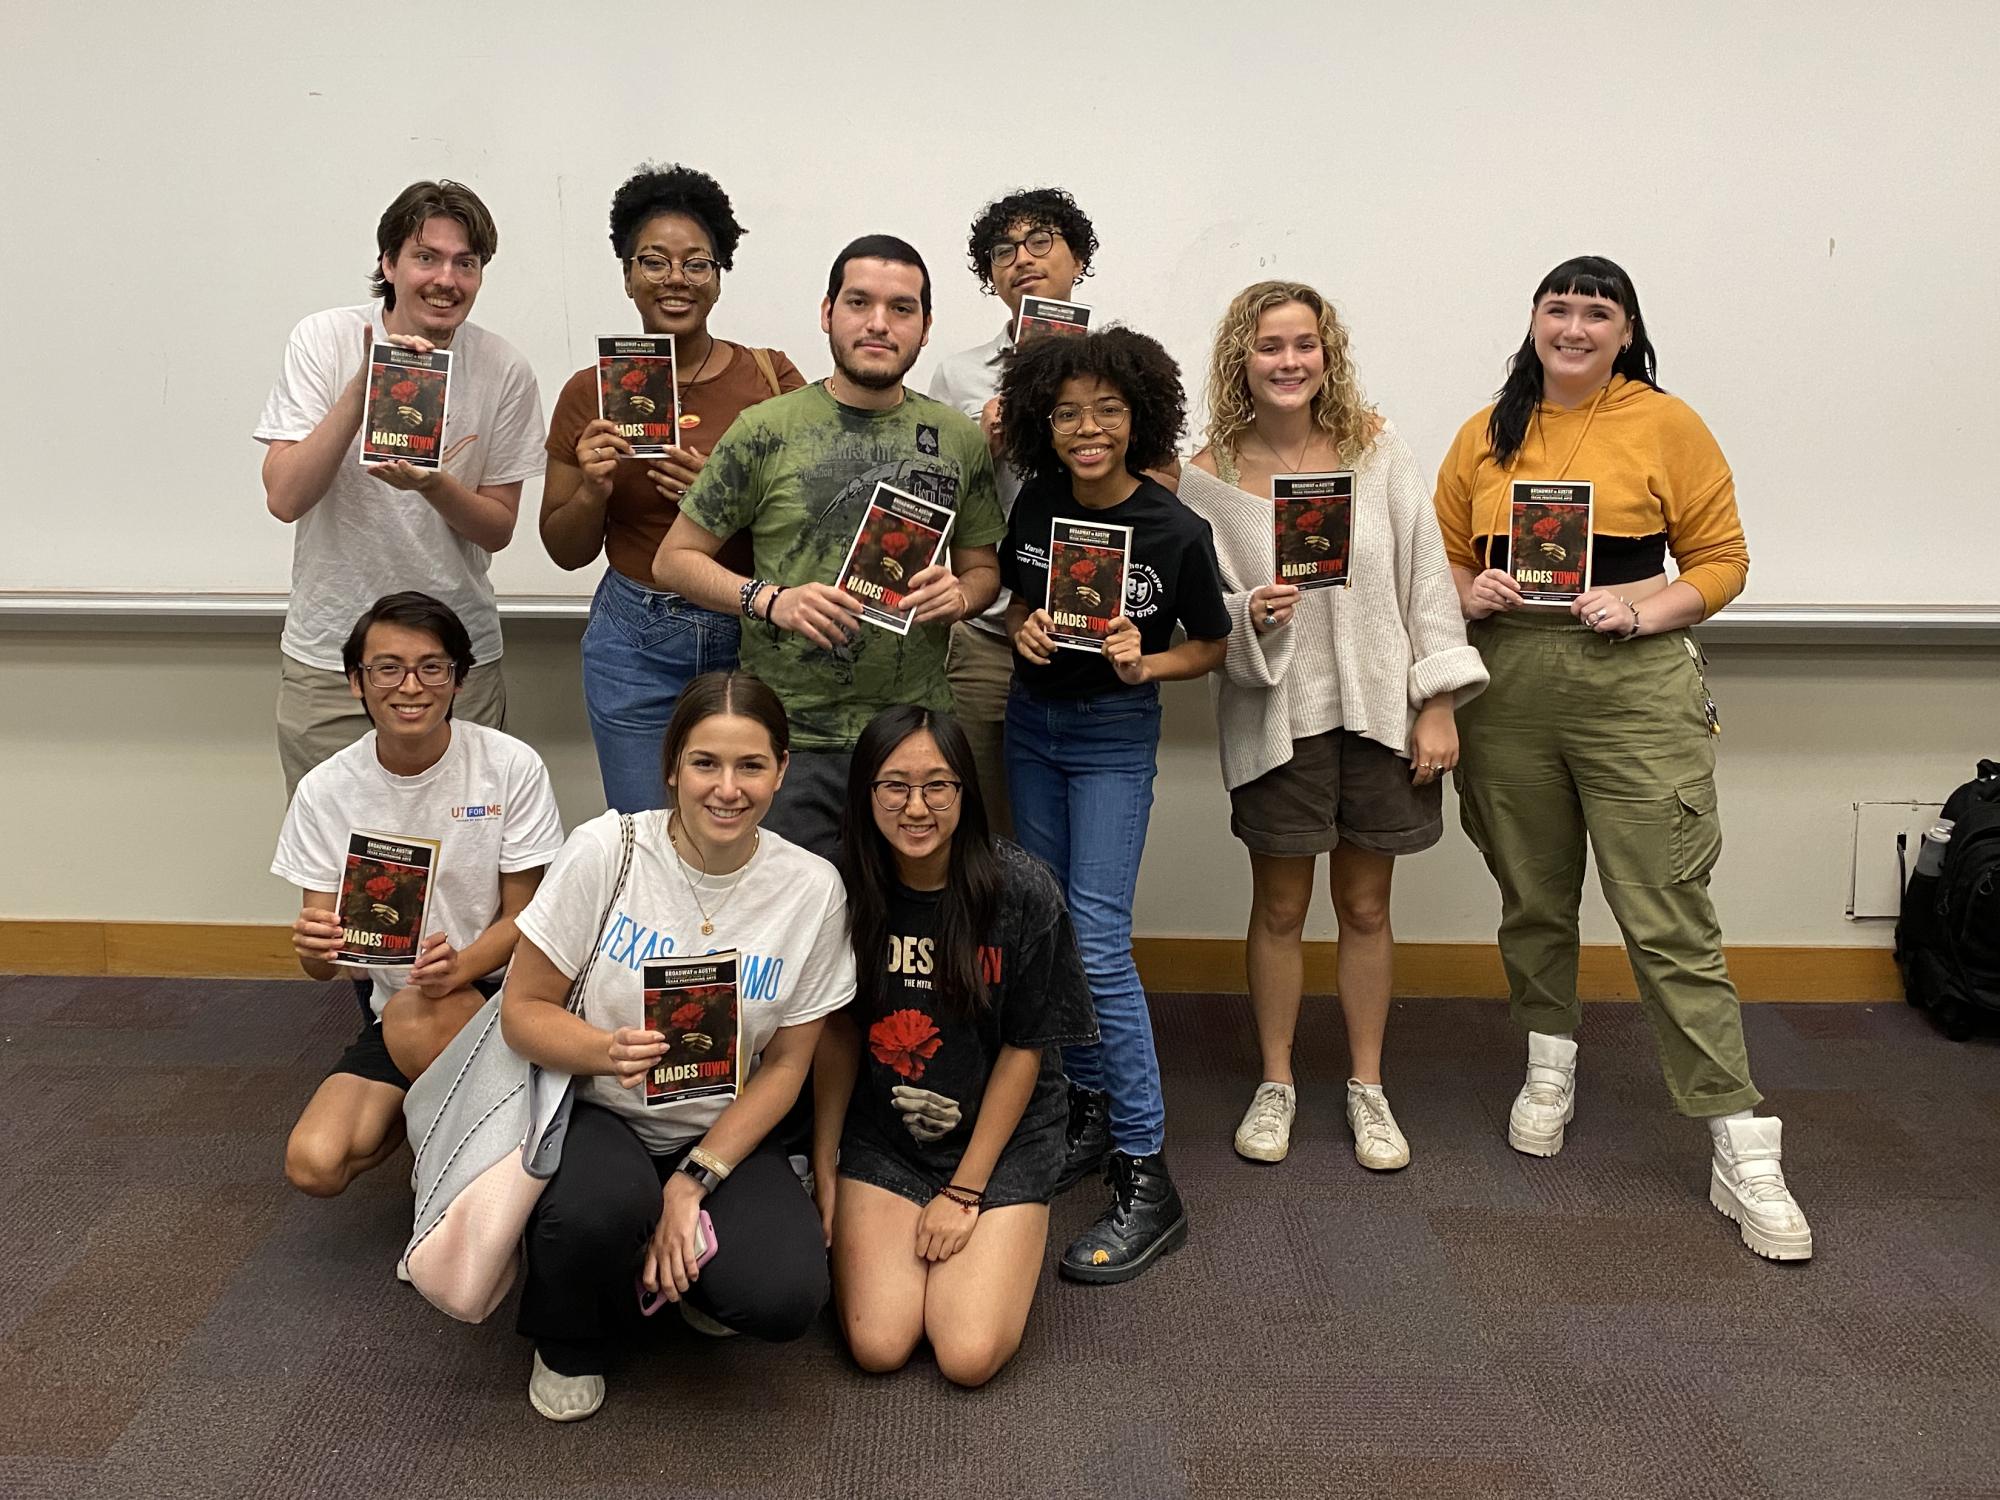 Theatre and Dance students pose with playbills from HADESTOWN